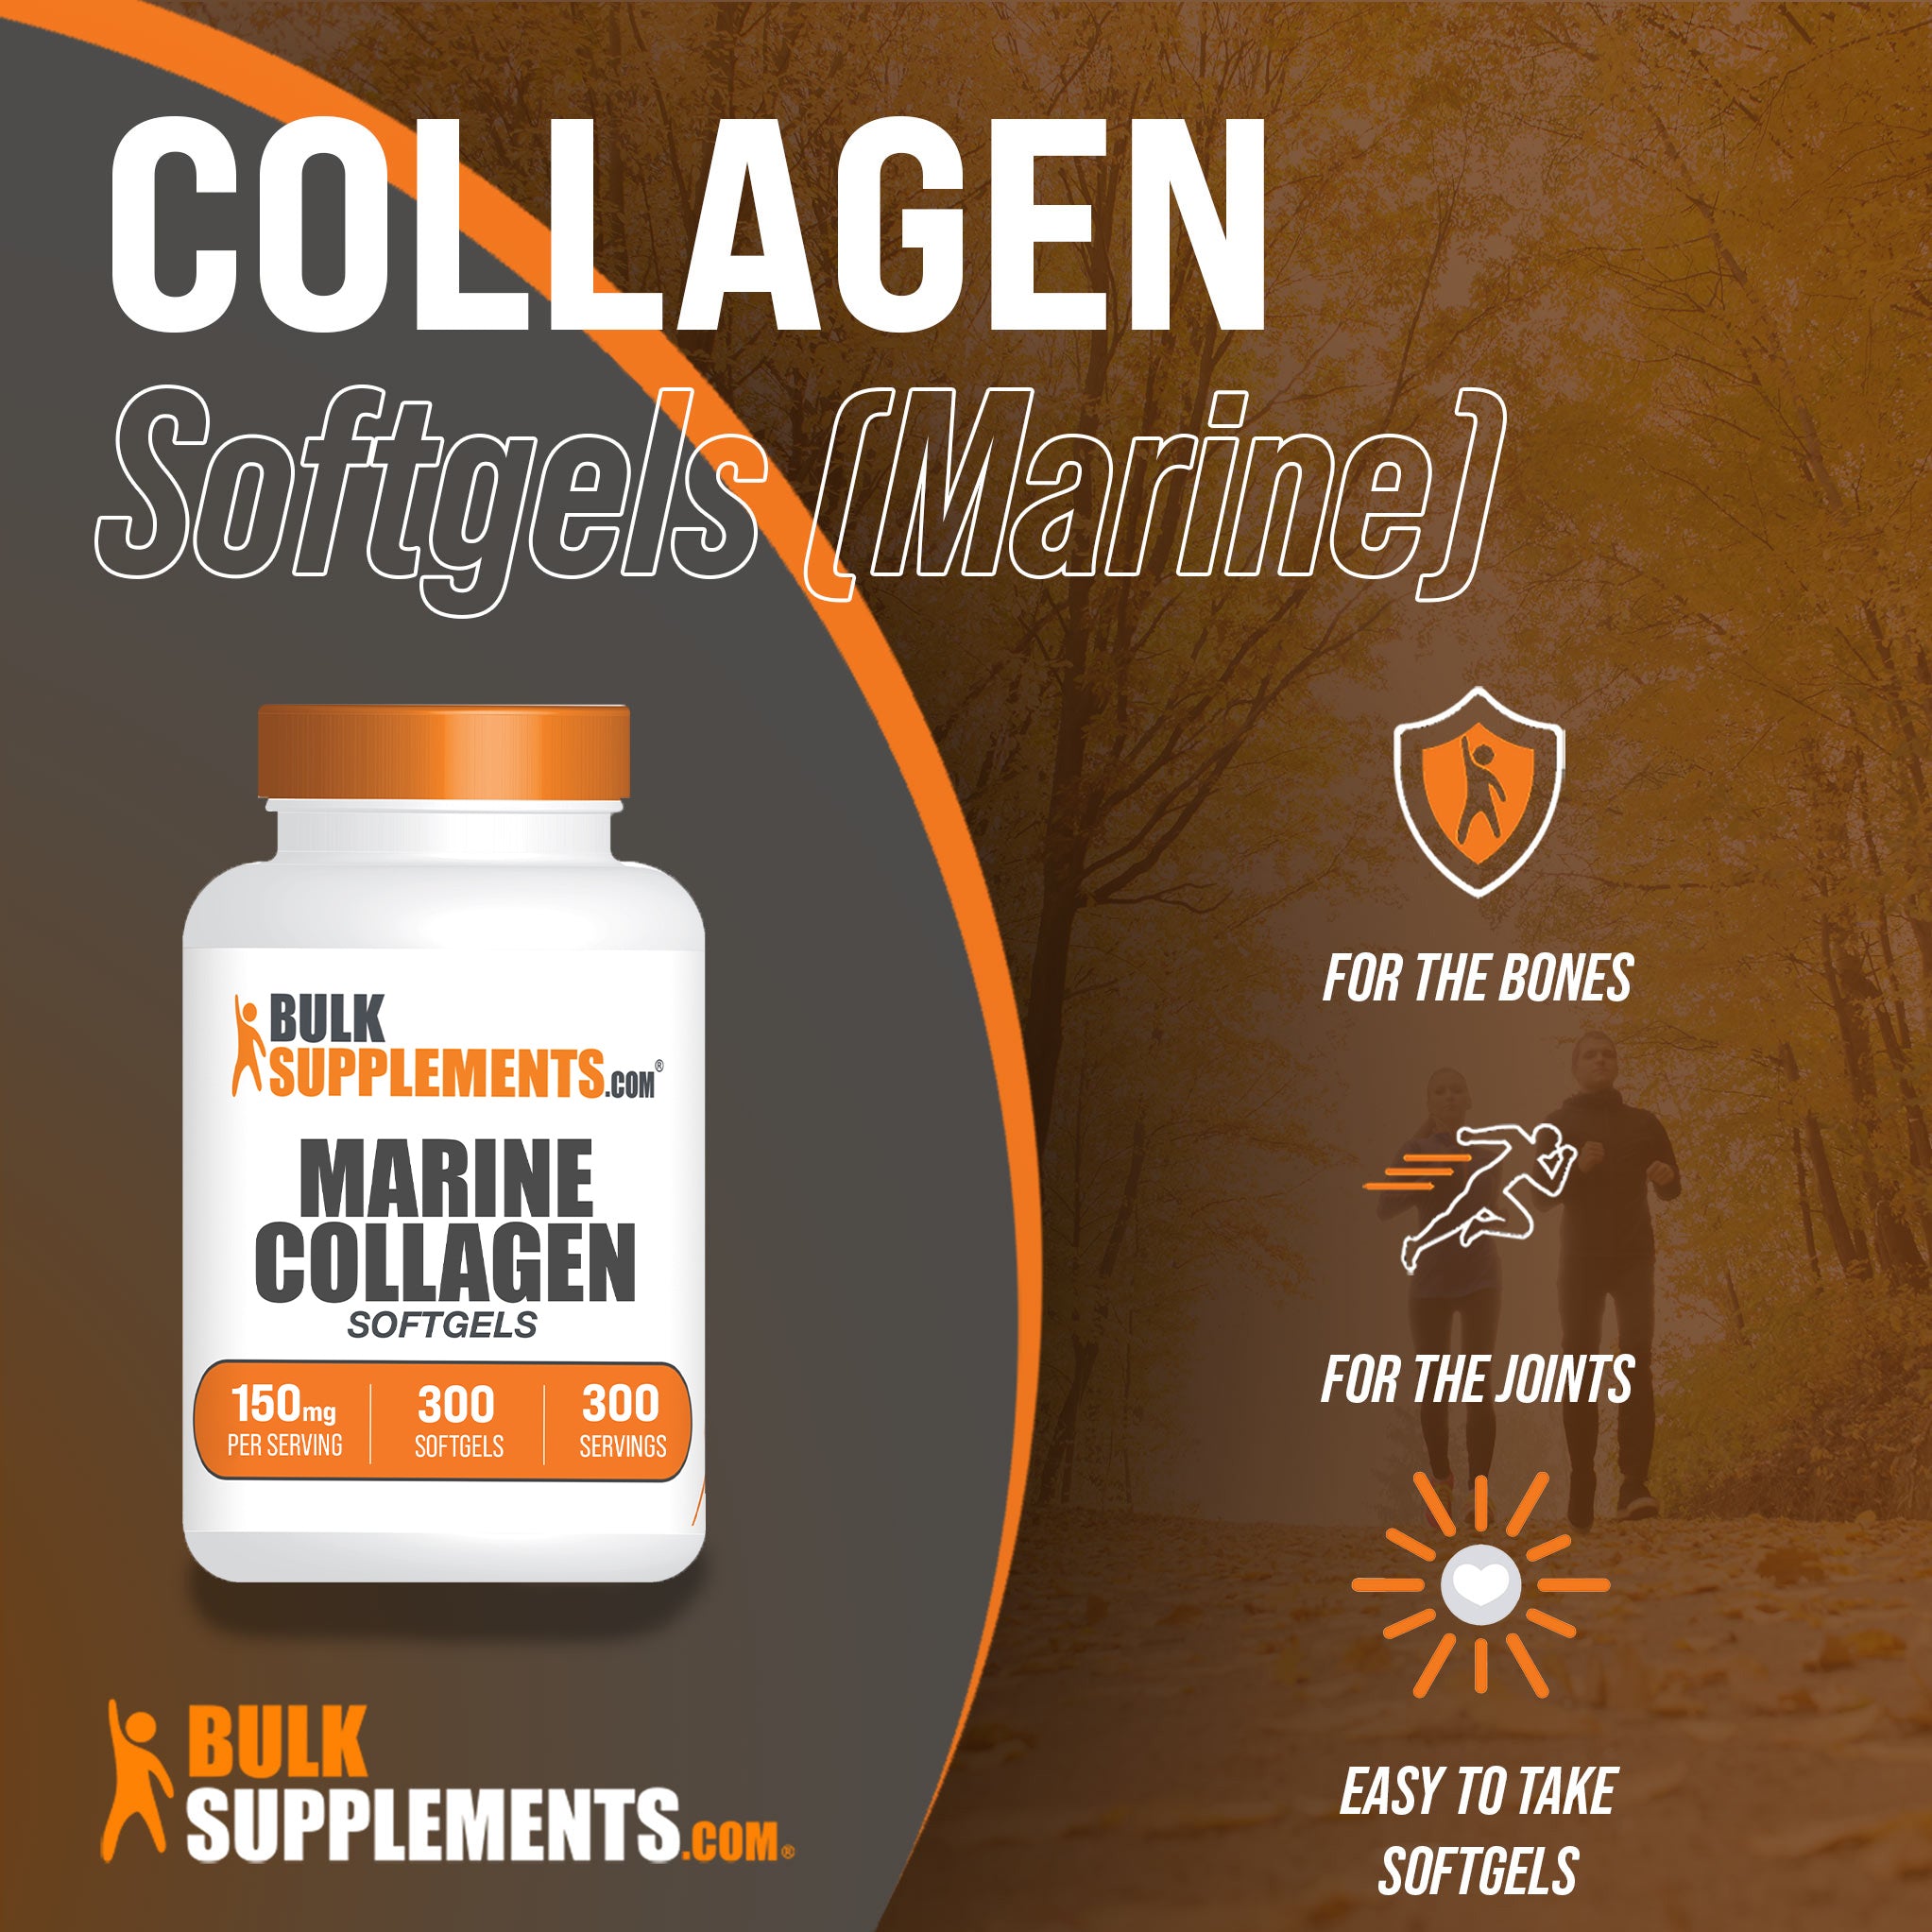 Benefits of Marine Collagen Softgels; for the bones, for the joints, easy to take softgels